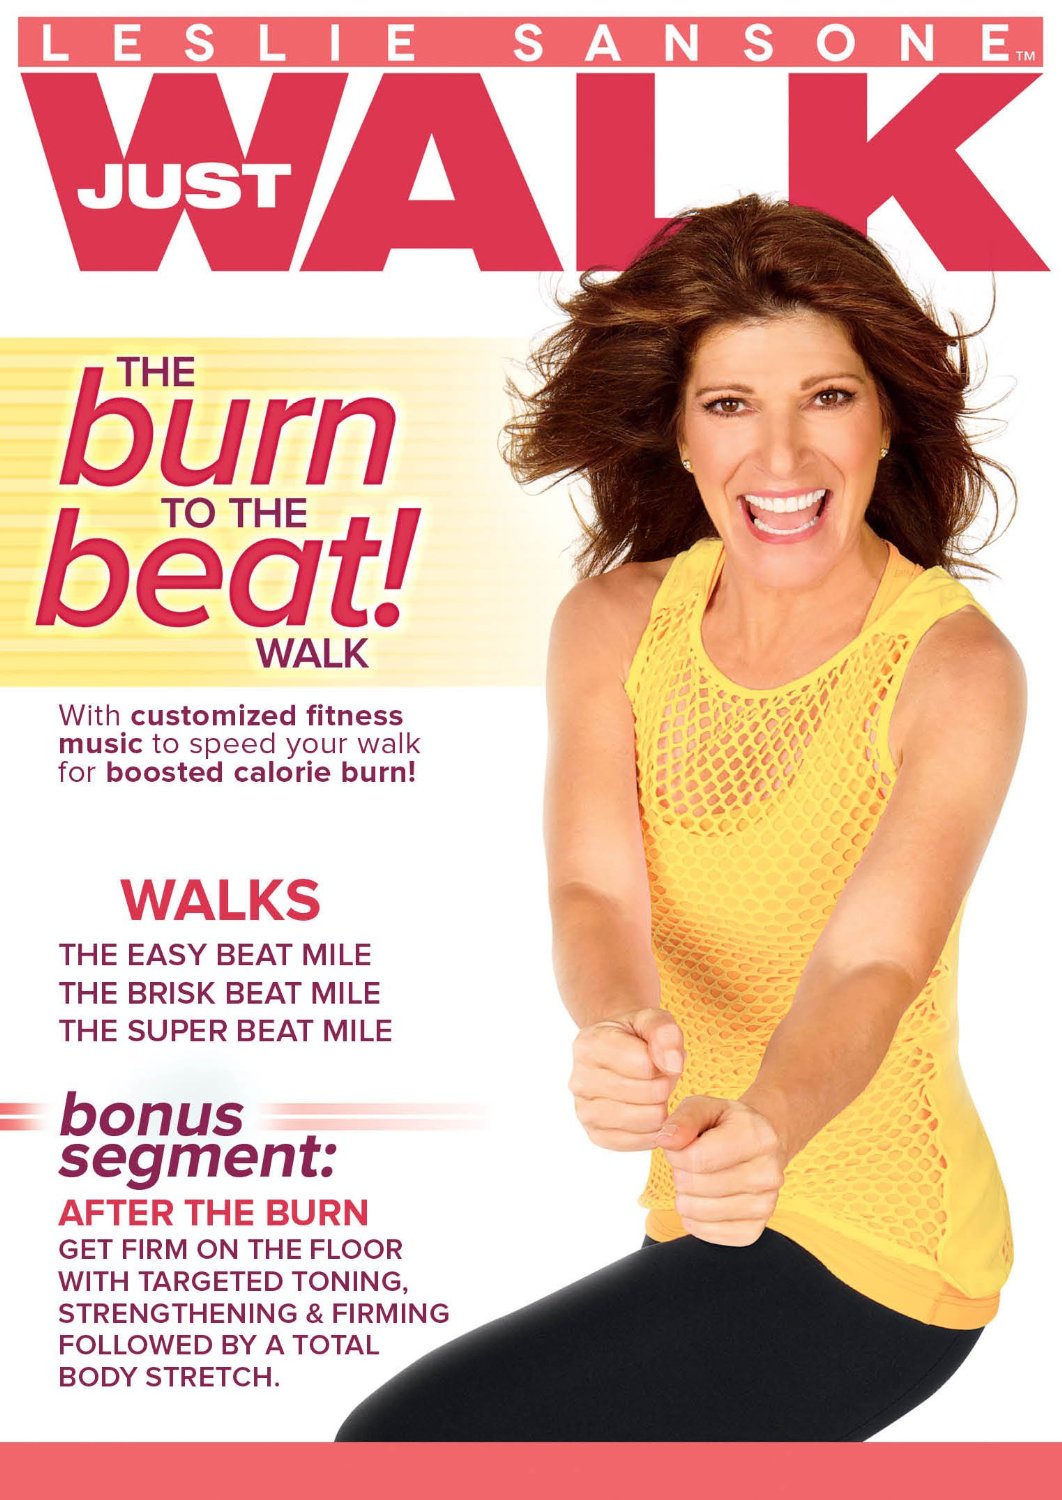 Leslie Sansone “Burn to the Beat” fitness walking dvd review and  **GIVEAWAY**